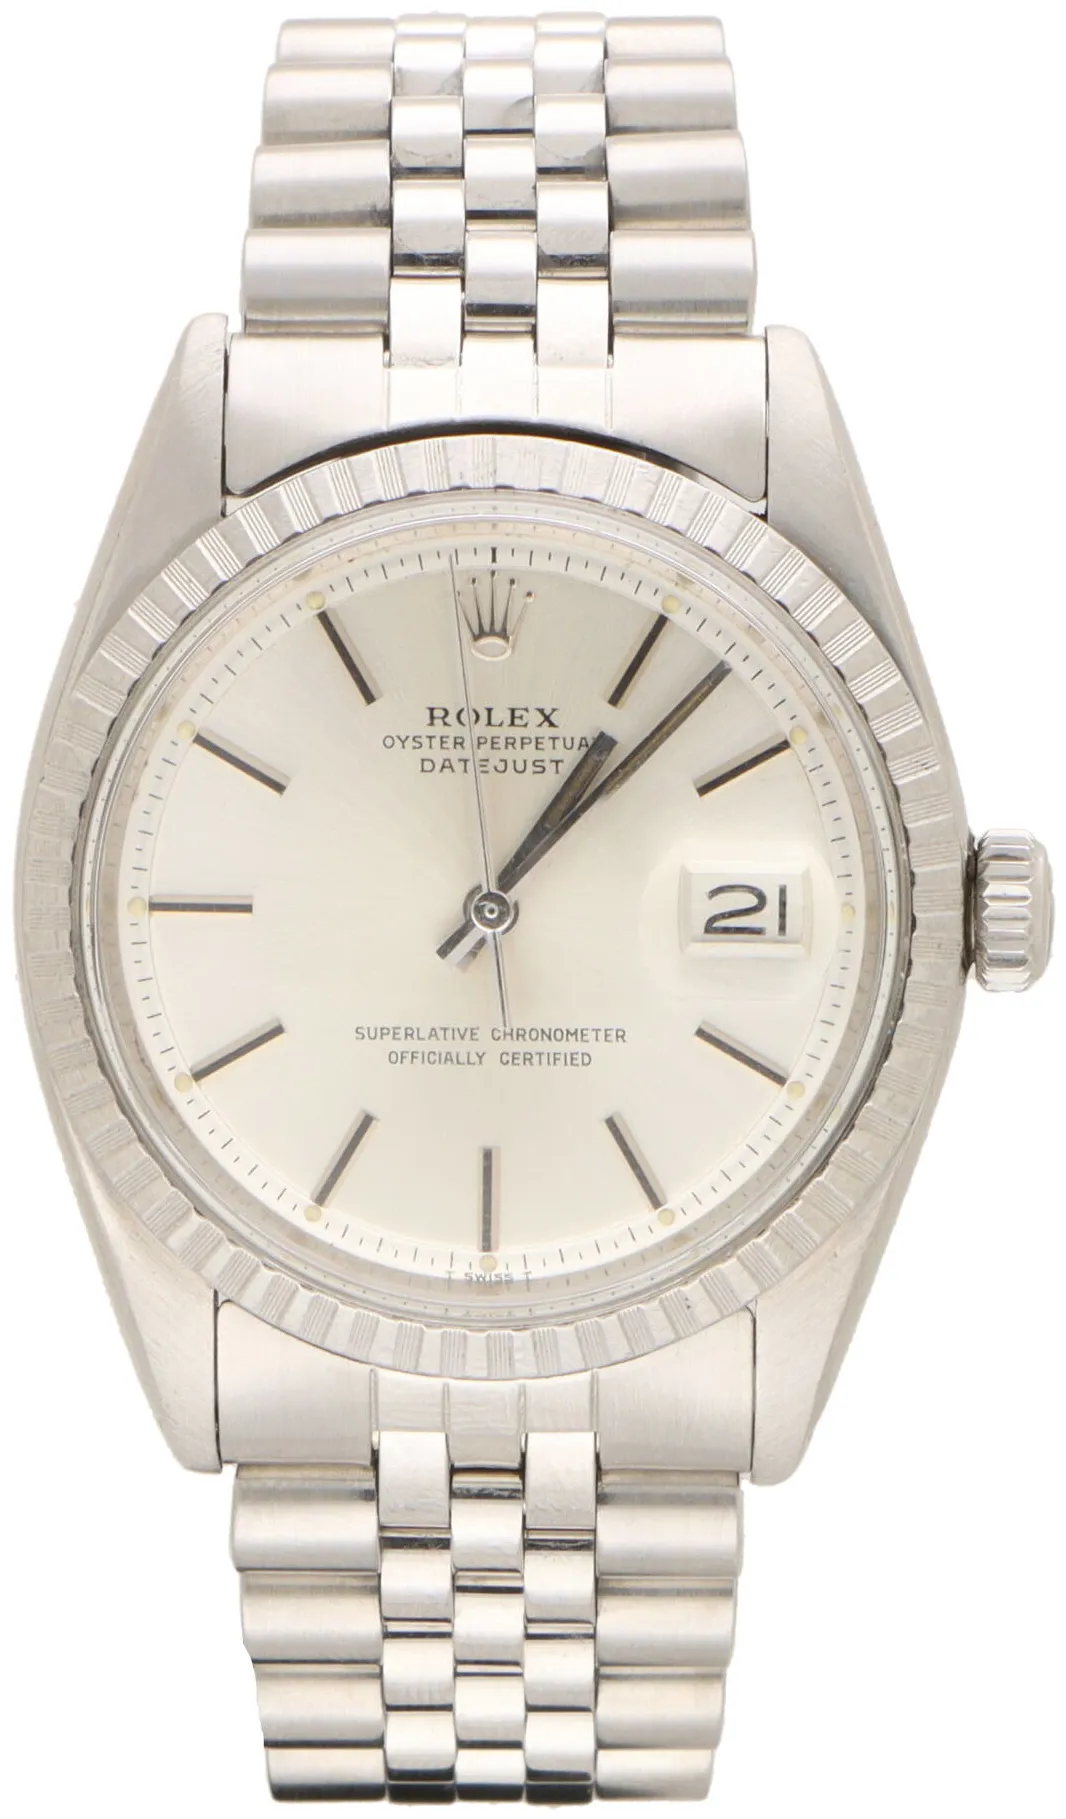 Rolex Oyster Perpetual "Datejust" 16030 36mm Stainless steel Silver